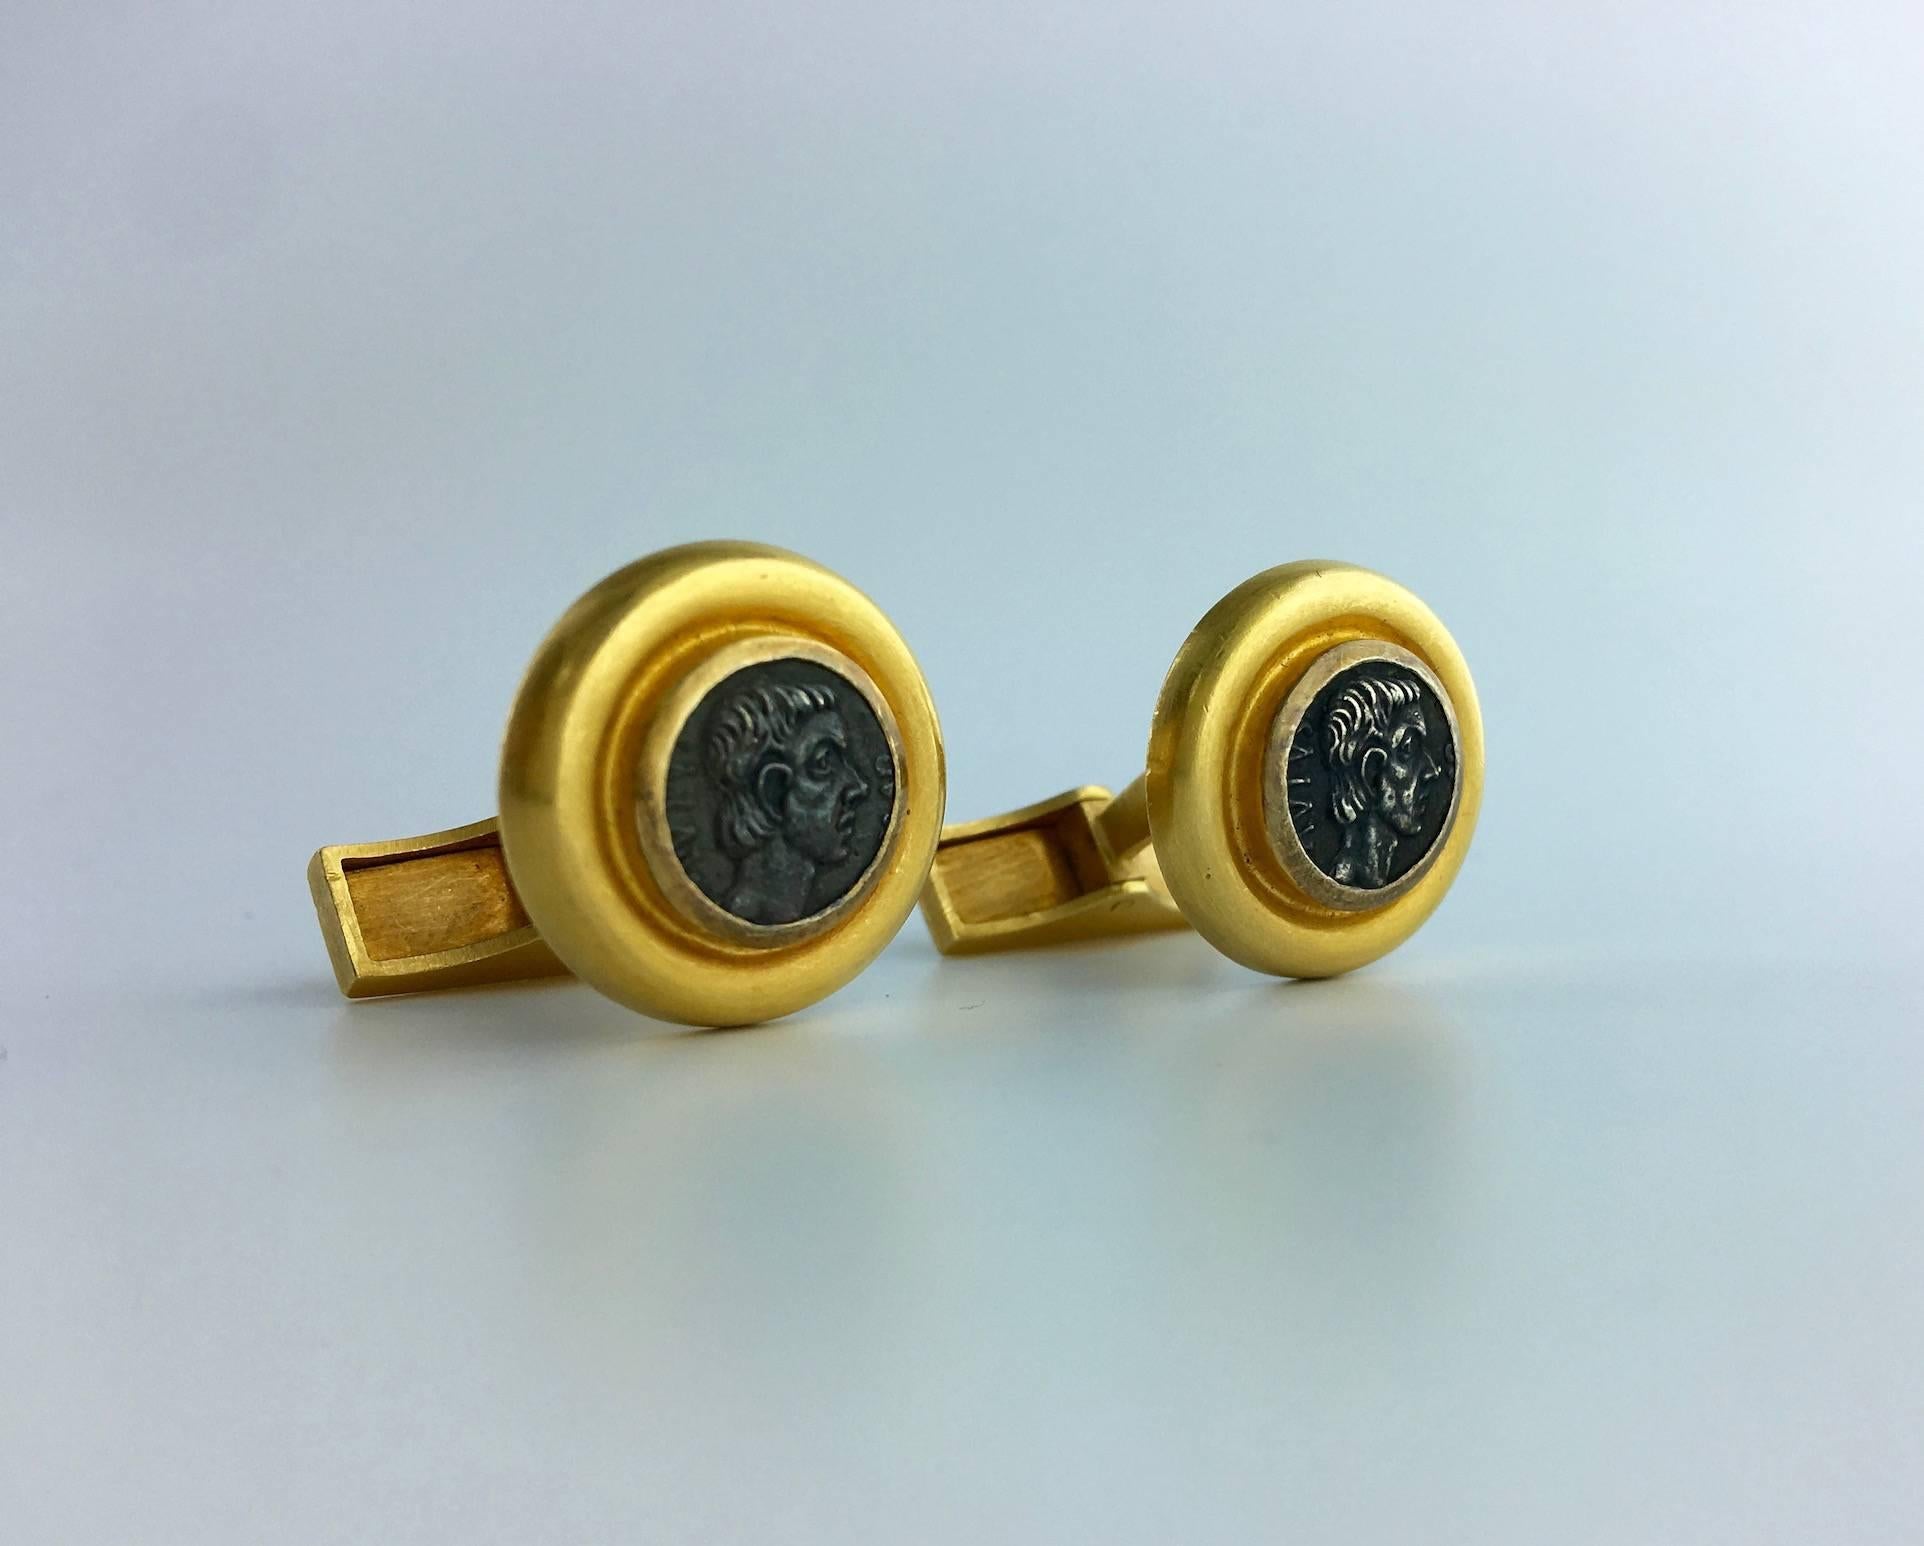 Very impressive size and paradoxically easy to wear. The gold is matte and the systems are the best that can be used for cufflinks.
Each pattern holds an Antique style Greek coin representing Alexander the Great on blacken silver. All the cufflinks